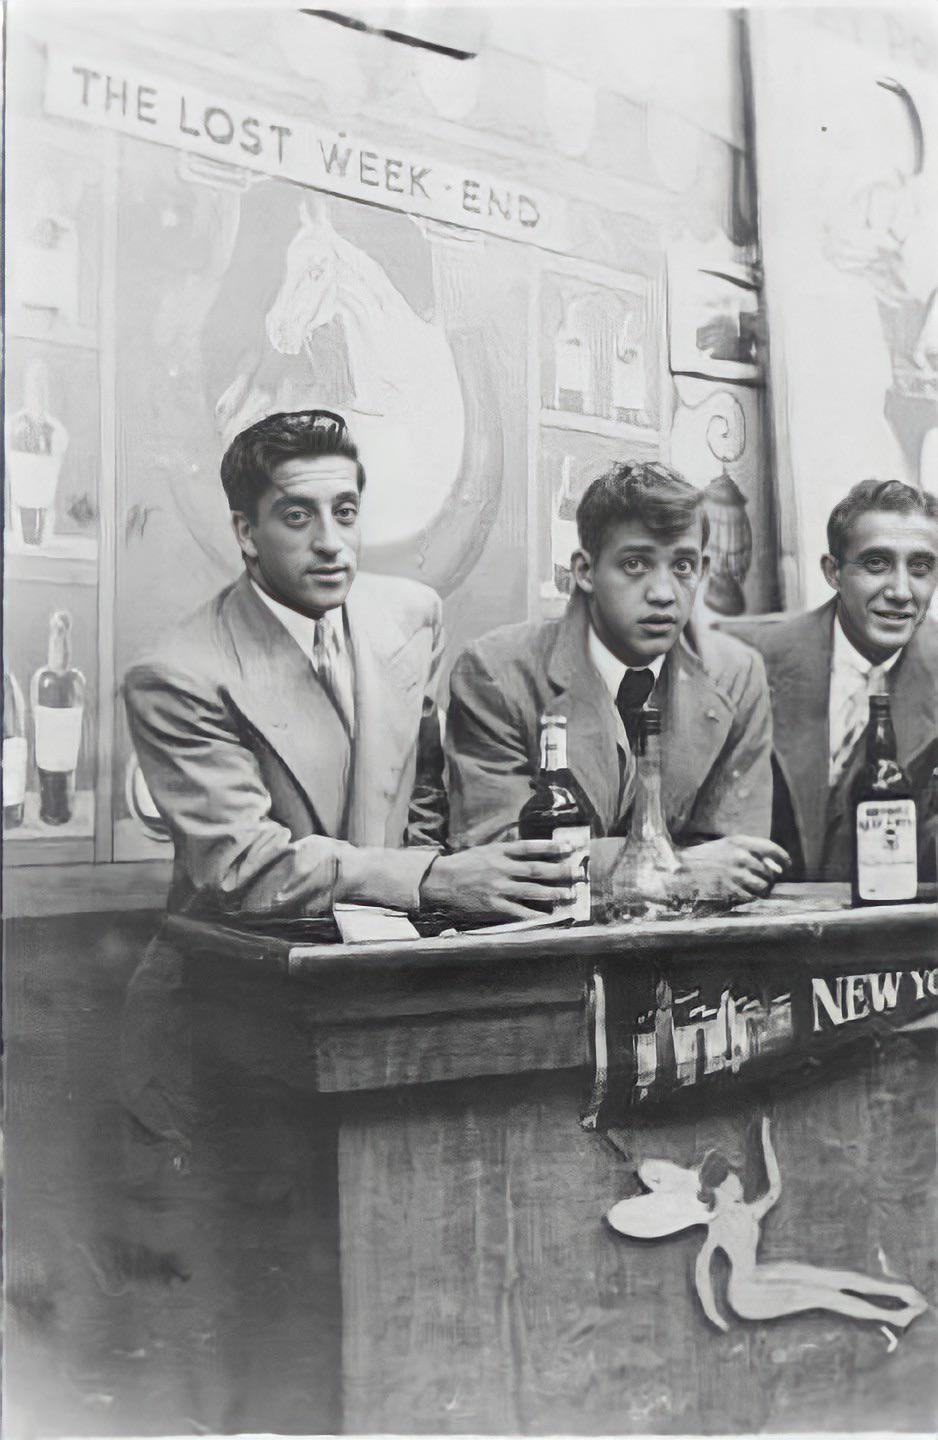 My grandfather (center) and his wiseguy buddies, early 1950s.jpg